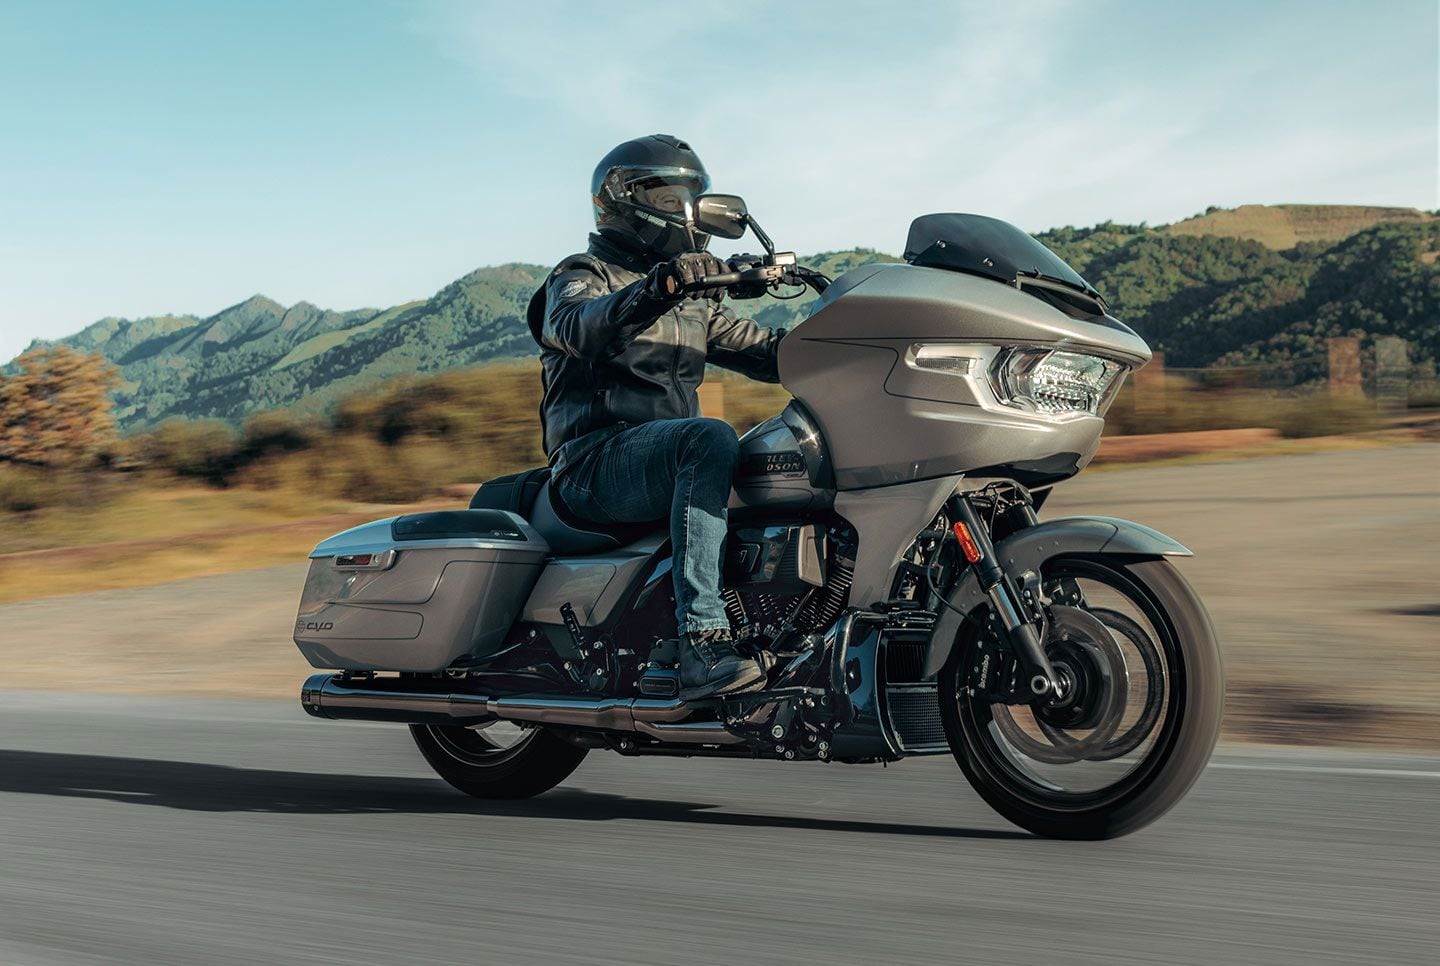 Classic sharknose fairing gets a bold new update on the 2023 CVO Road Glide, with a more aggressive snarl and new LED headlight arrangement with integrated turn signals.